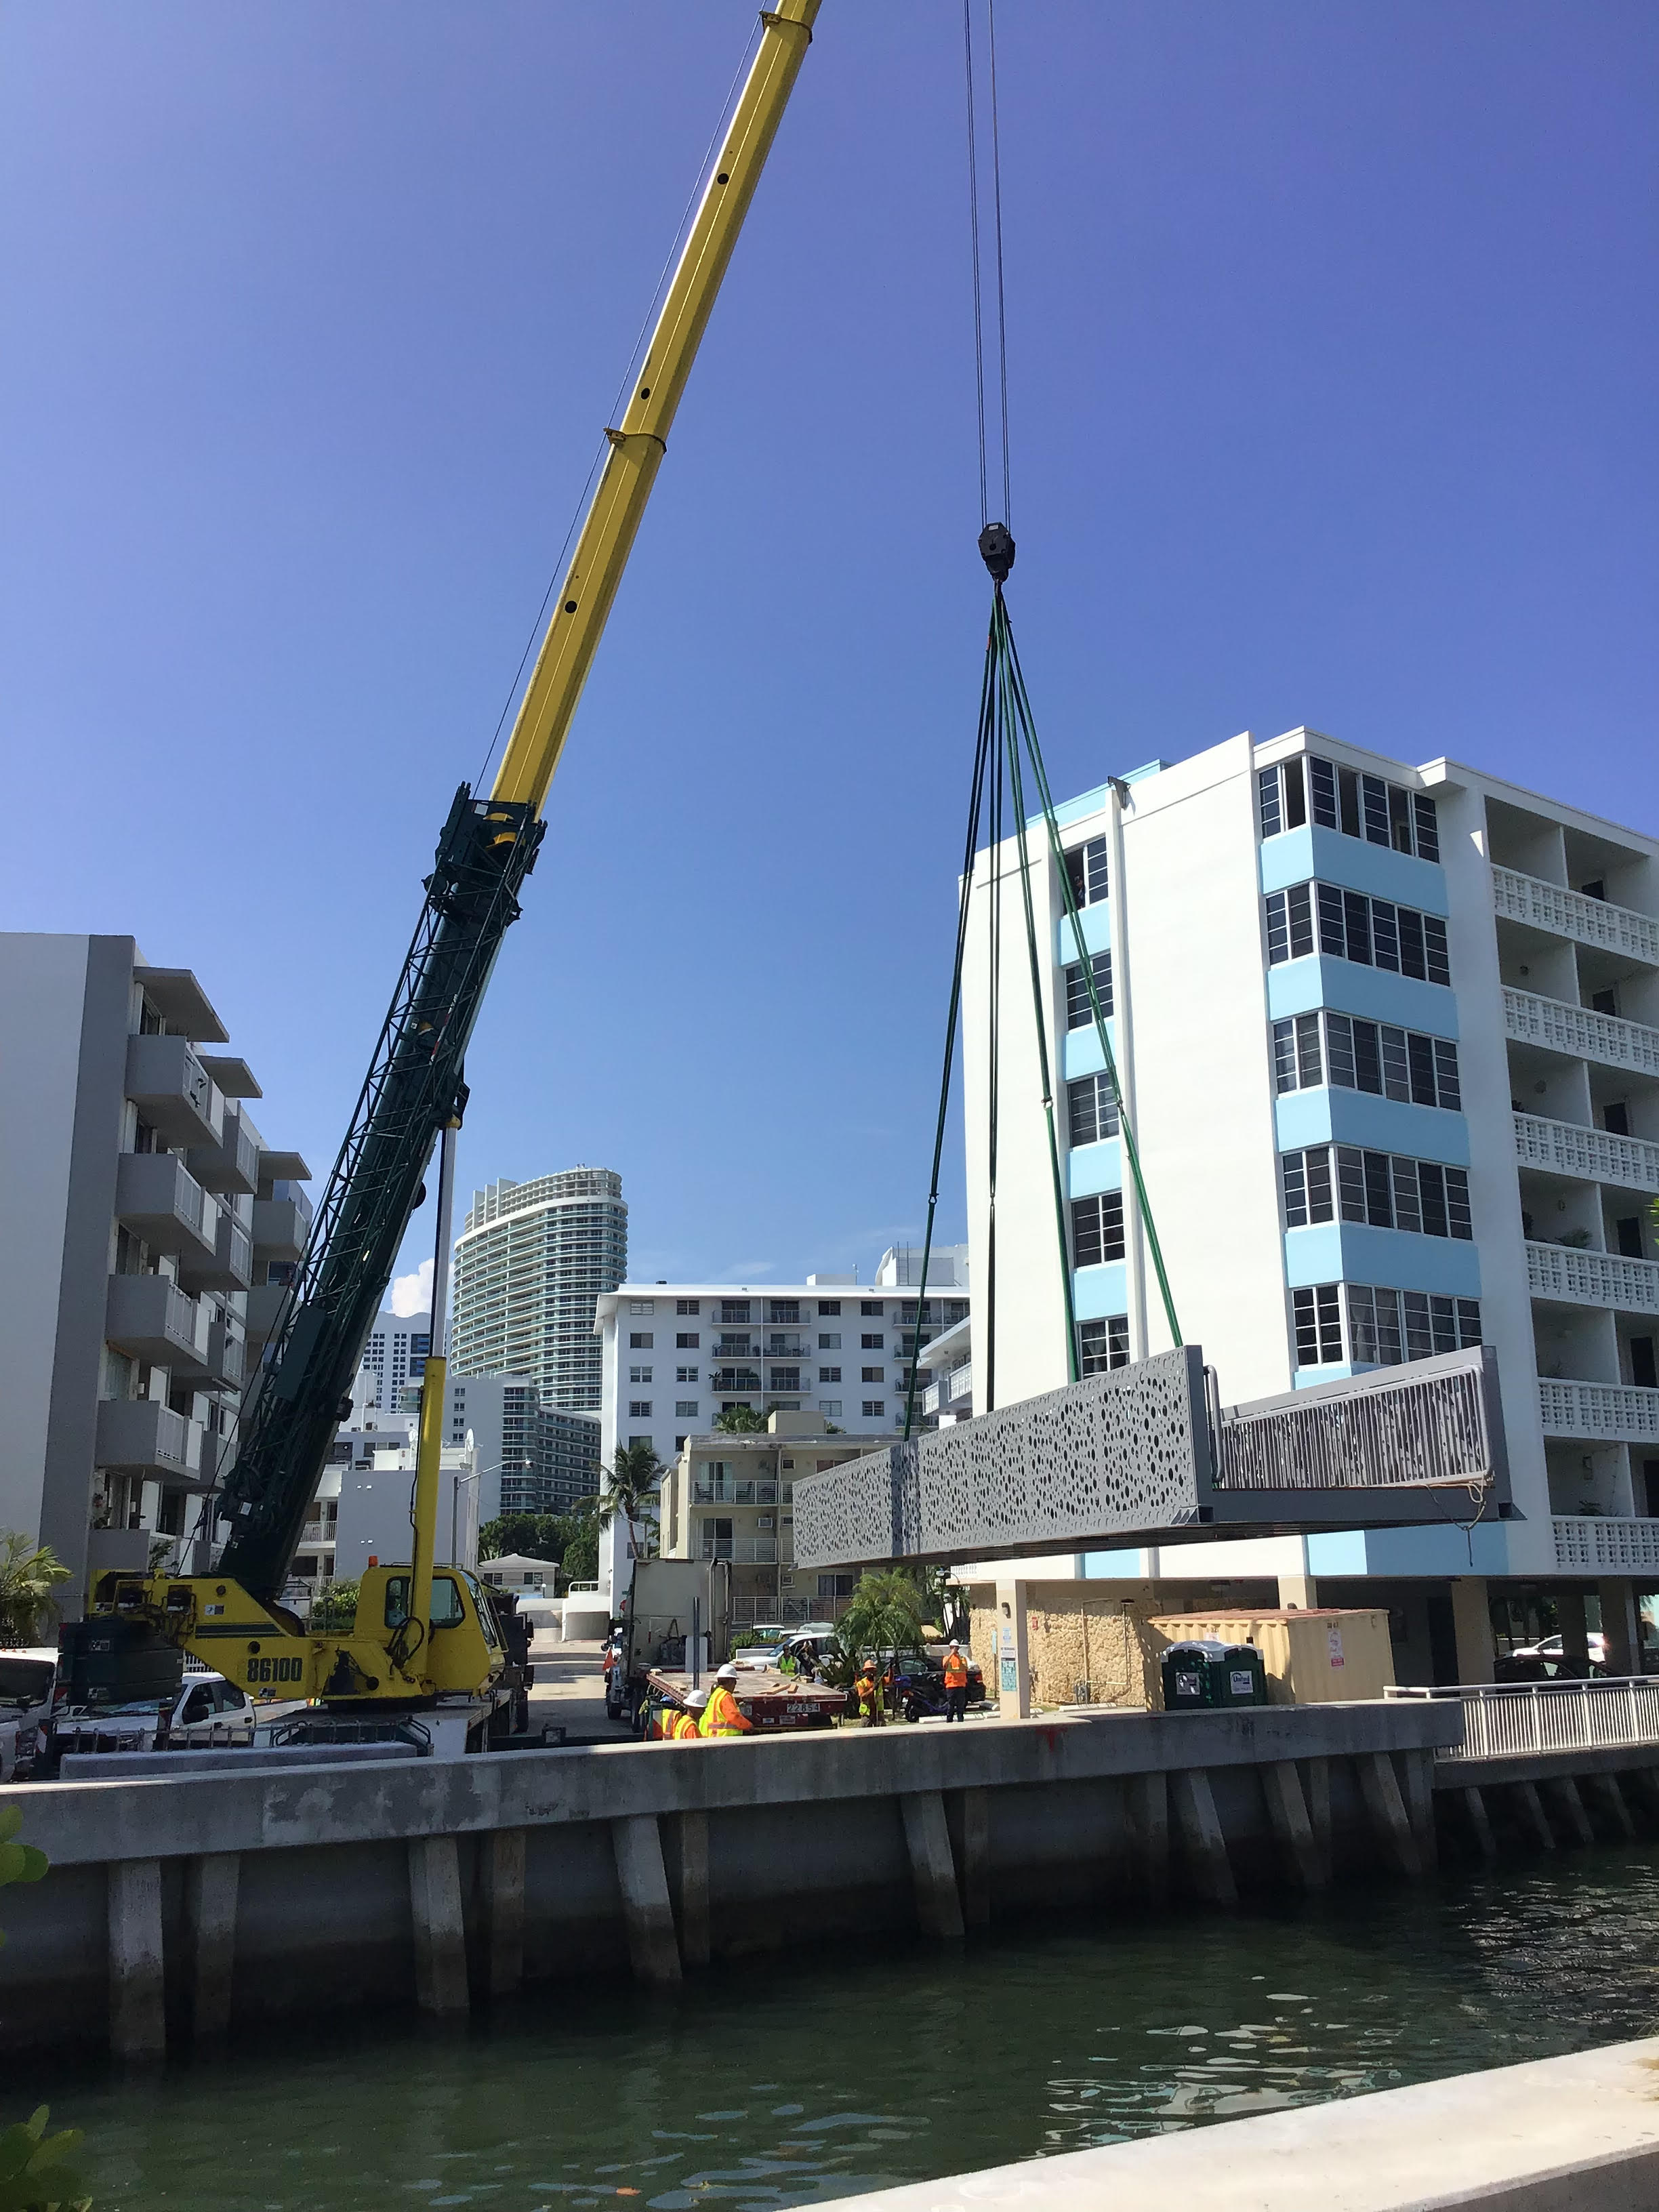 Bergeron crew uses a crane to set the pedestrian bridge at West Avenue and Collins Canal in Miami Beach completing the Design Build project.